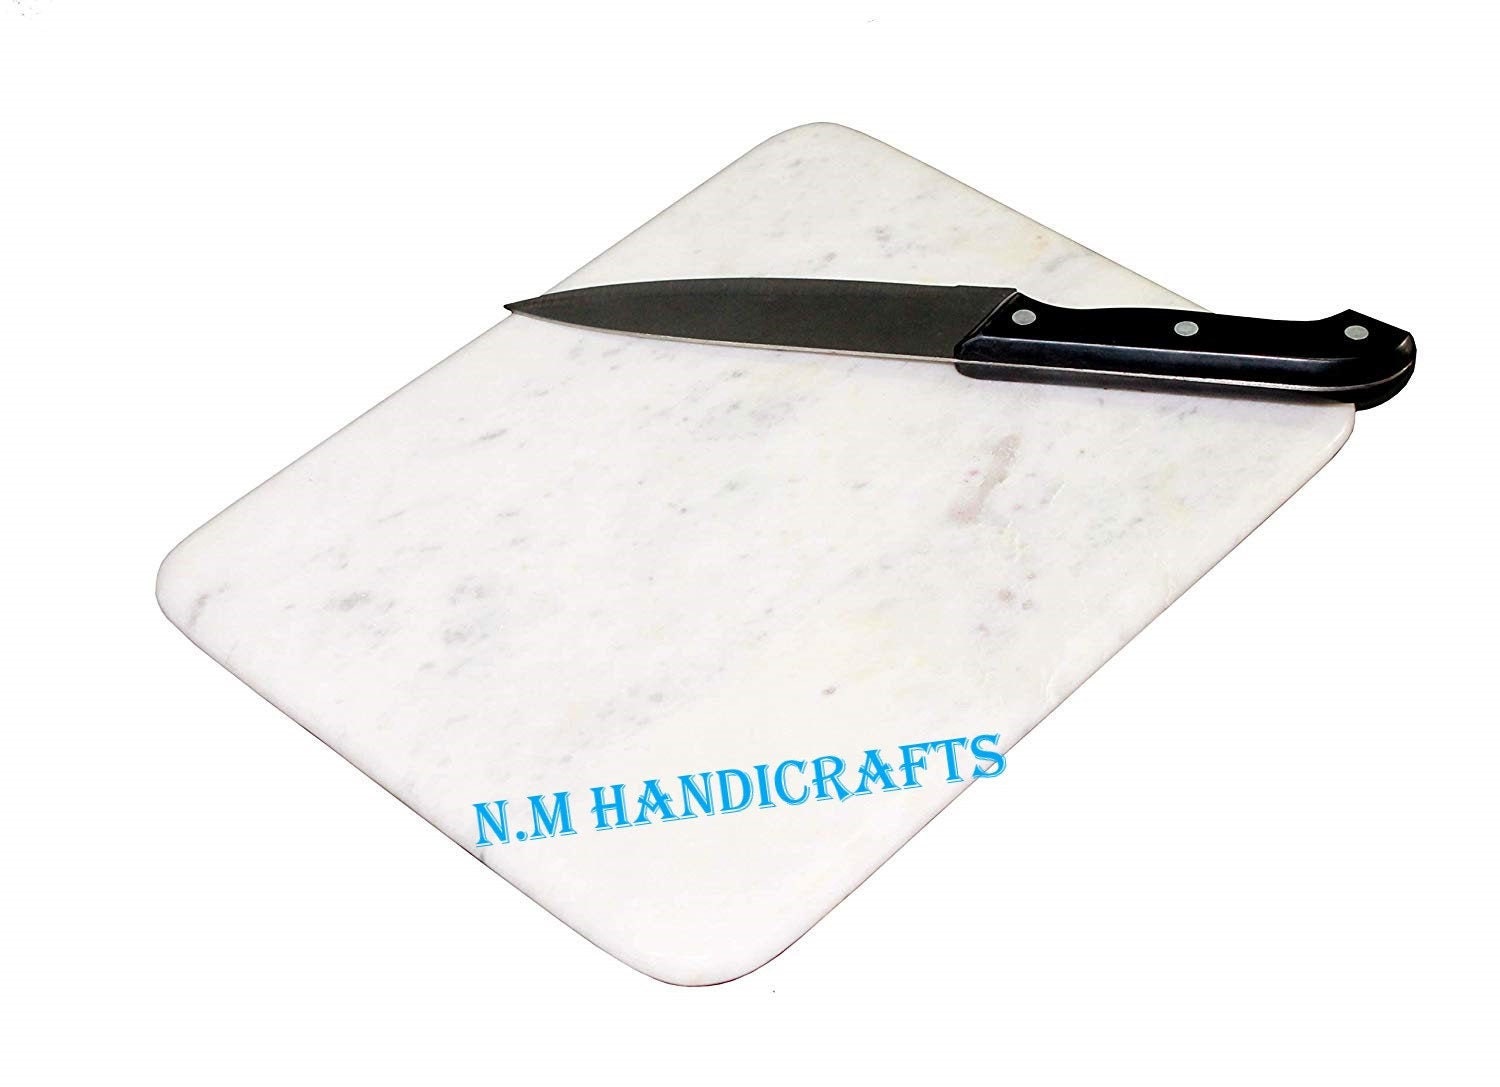 Premium White Marble Chopping Board, Gift, Kitchen Decor, Home Decor, Handcrafted Art, Cutting Board